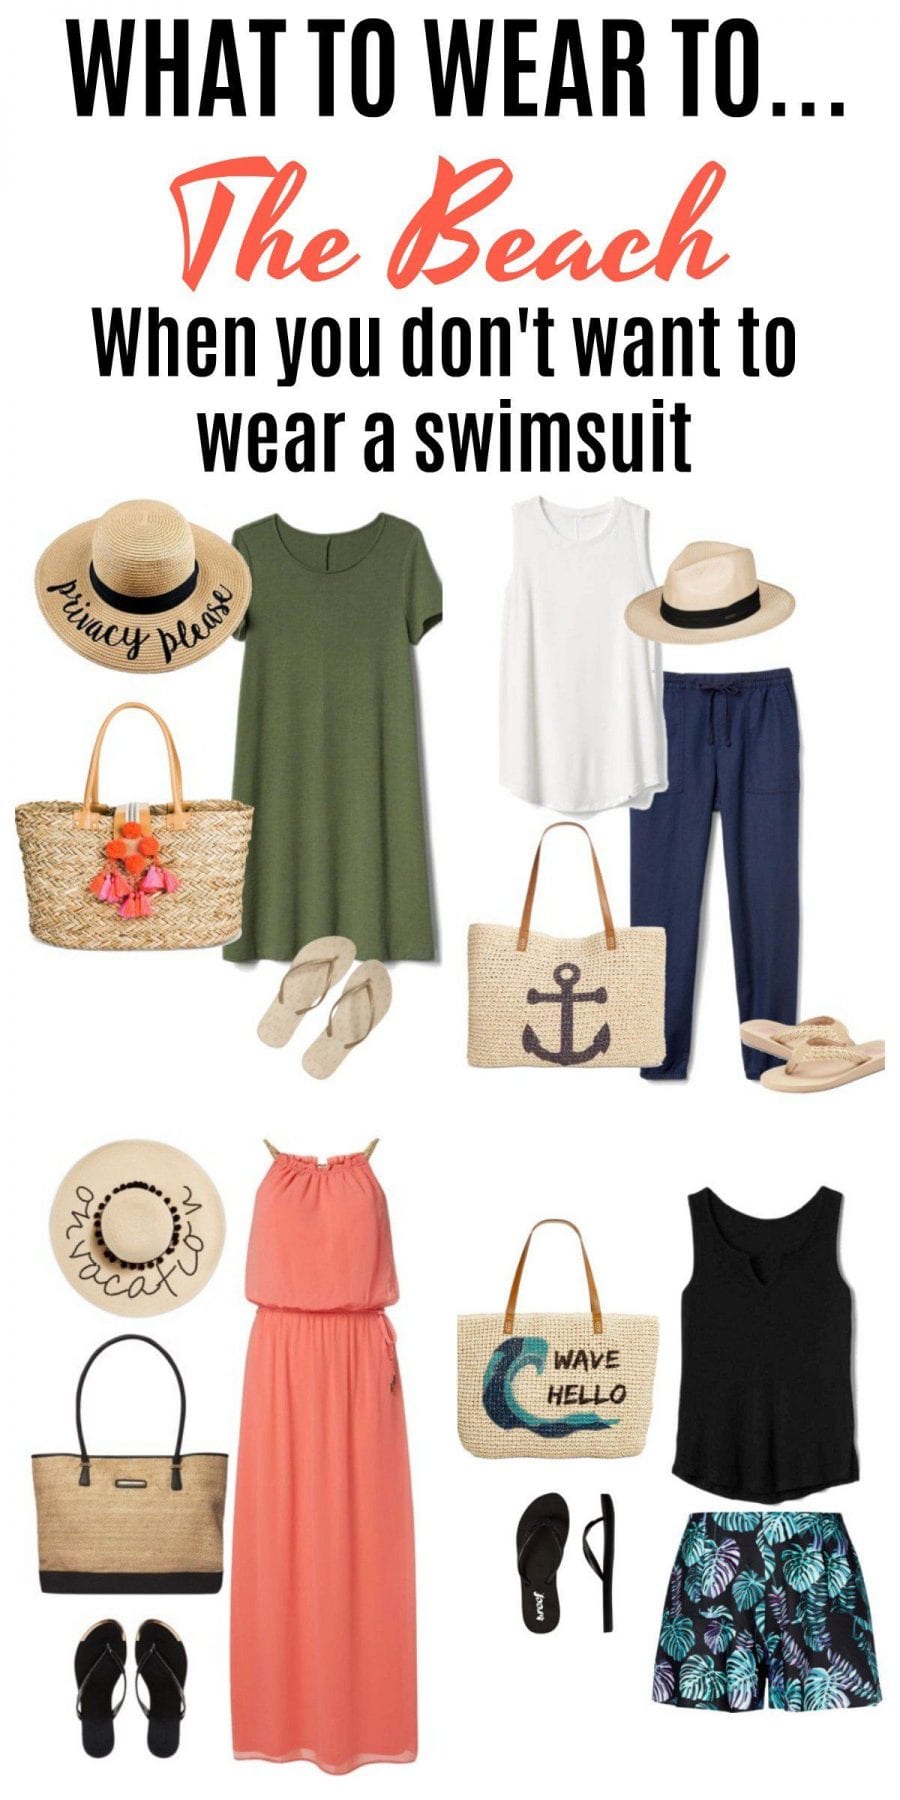 What To Wear To The Beach If You Don't Want To Wear or Have